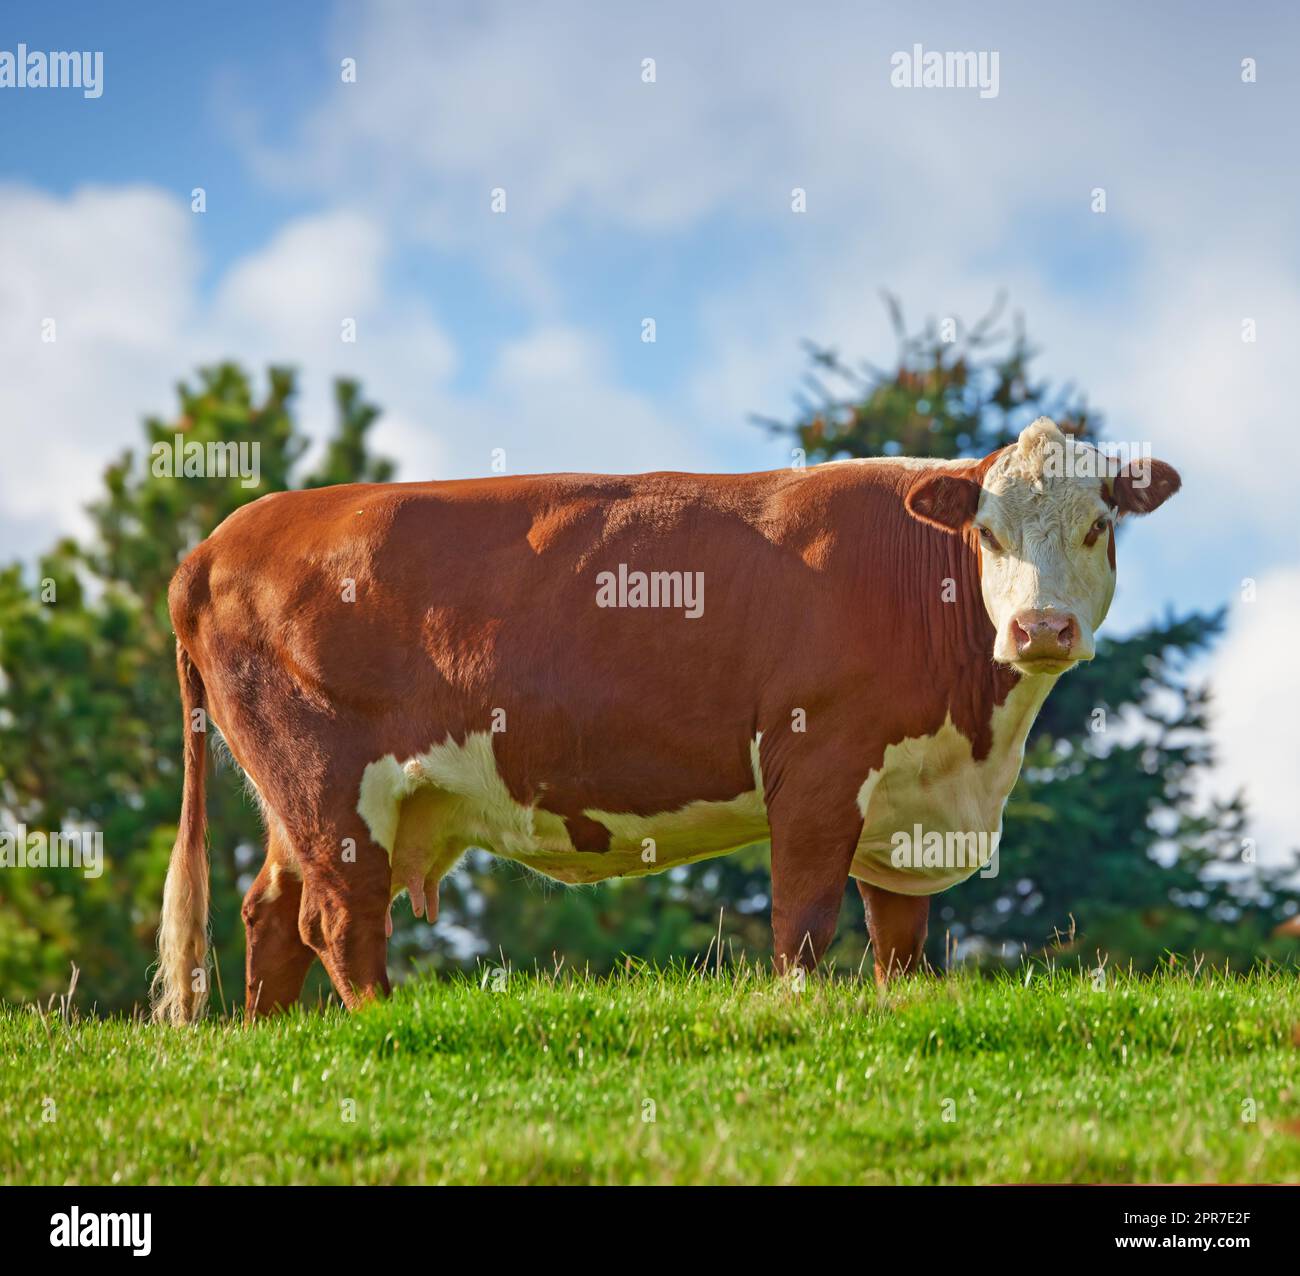 A large brown cow grazing on a field or farm in the rural countryside with blue sky copy space. Bovine bull livestock on an organic and sustainable cattle farm for the beef and dairy industry Stock Photo